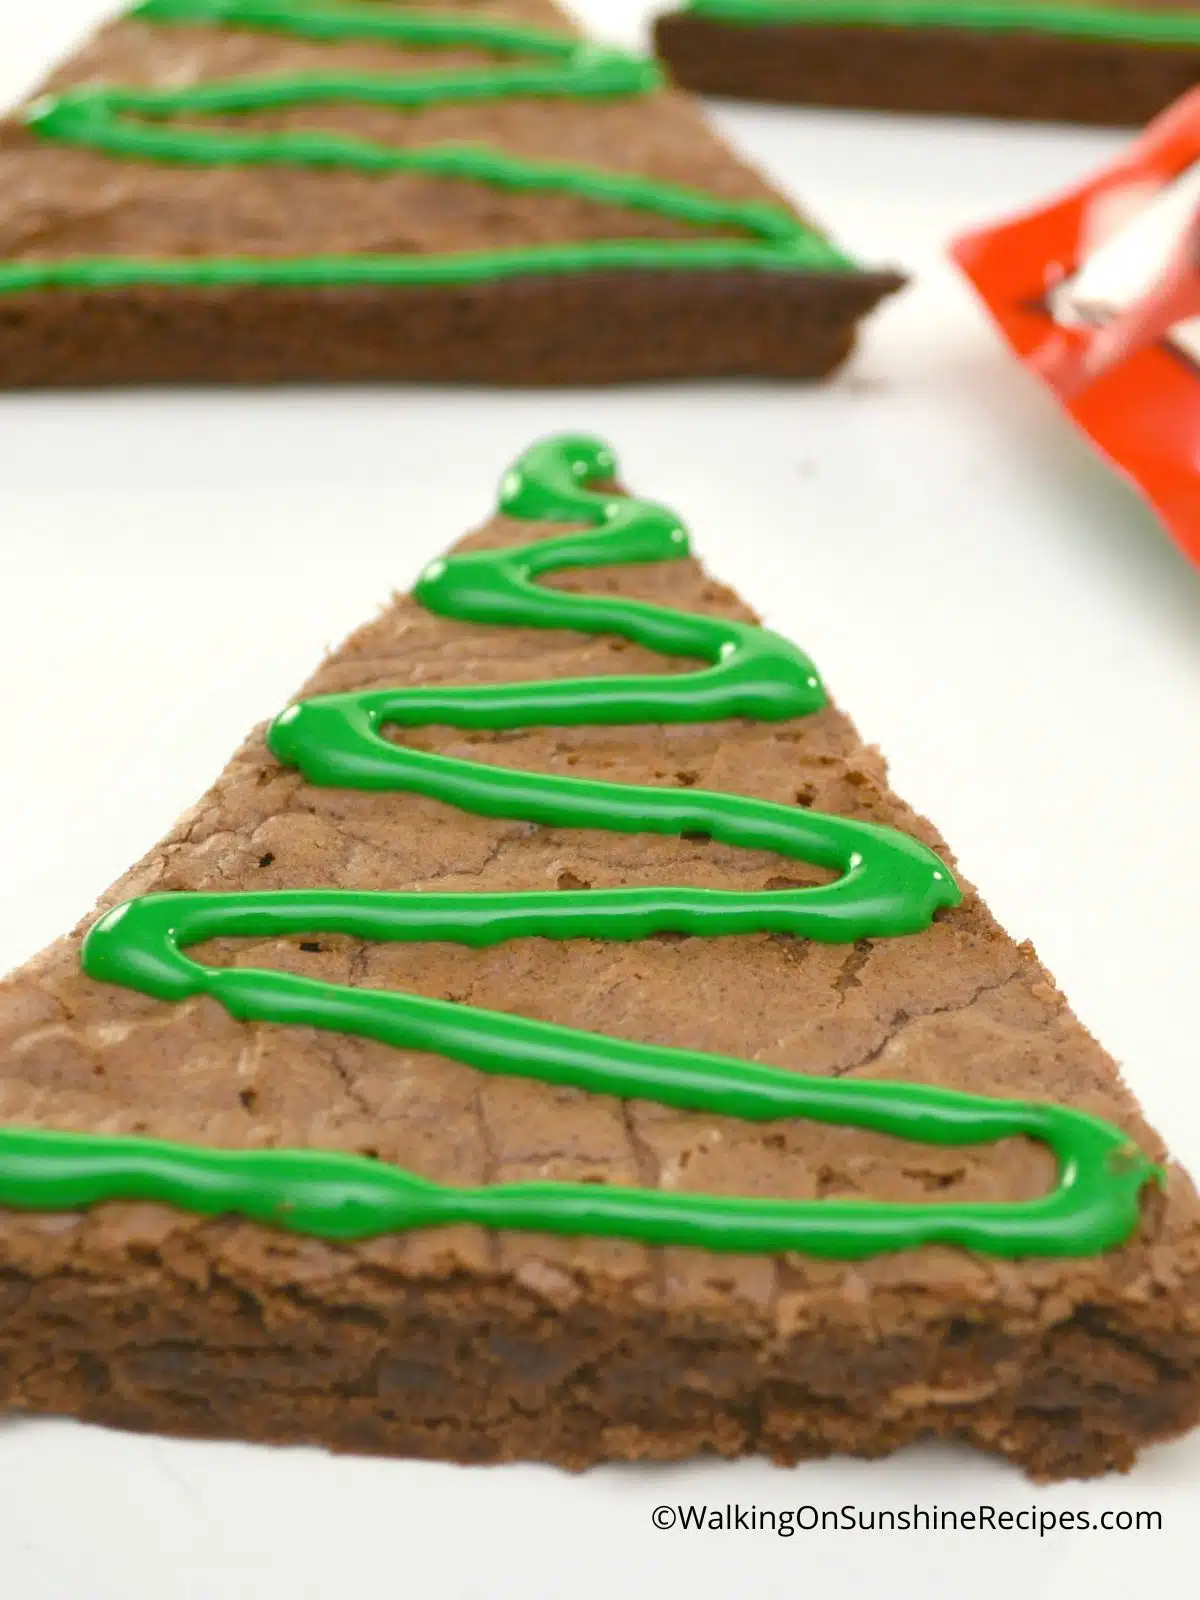 Green frosting on Christmas tree brownie.